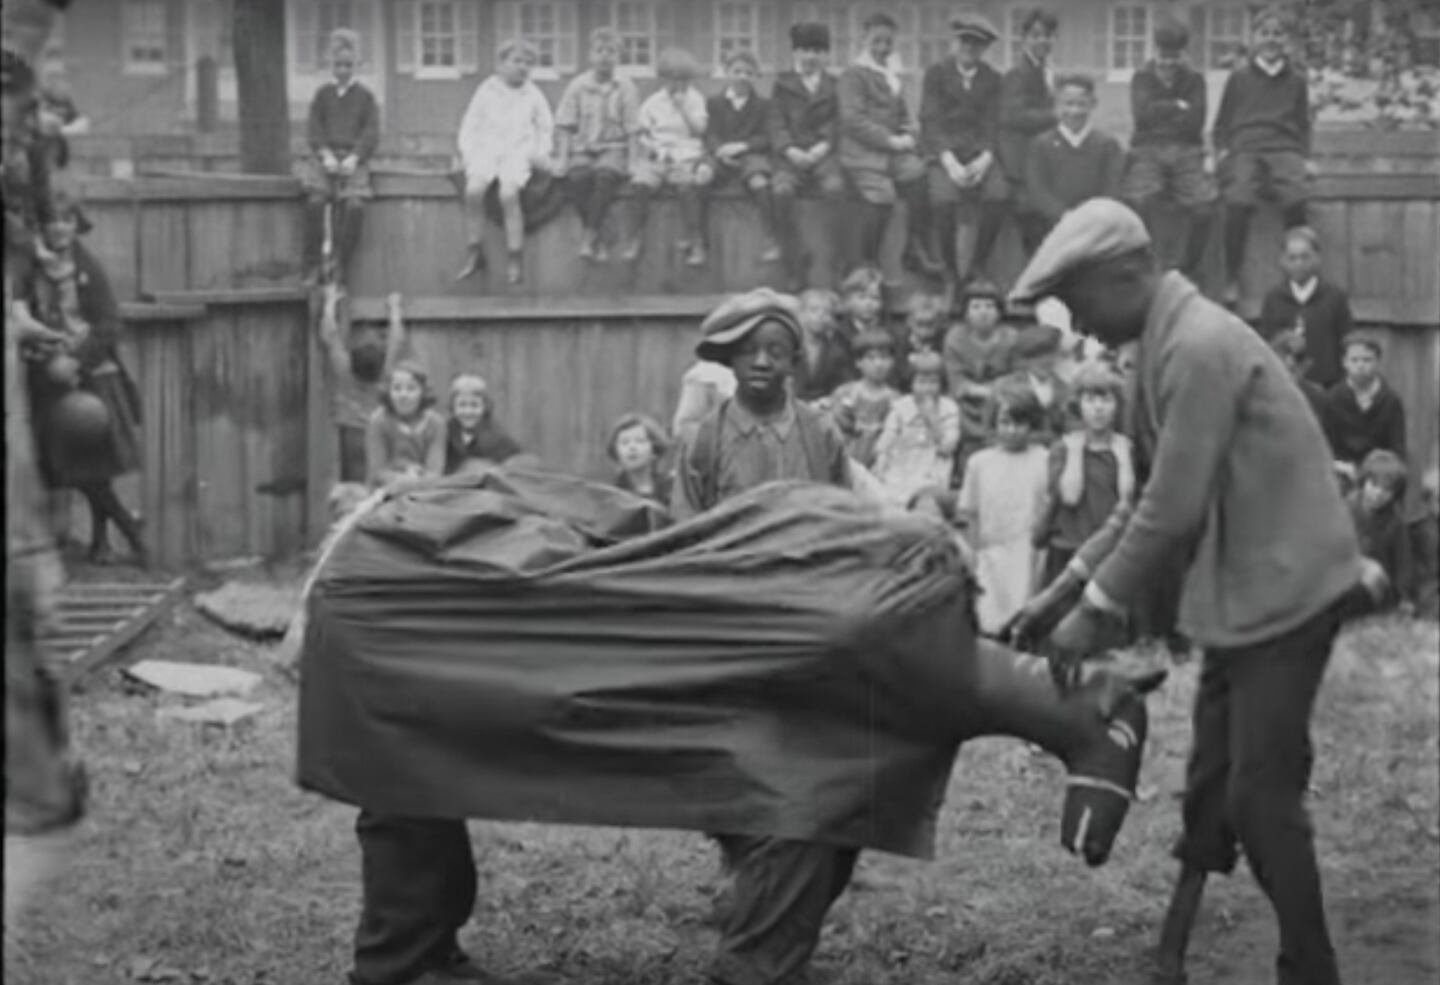 A man and his young helper put on a show for kids at a Pigtown school sometime between the 1920s and '30s.